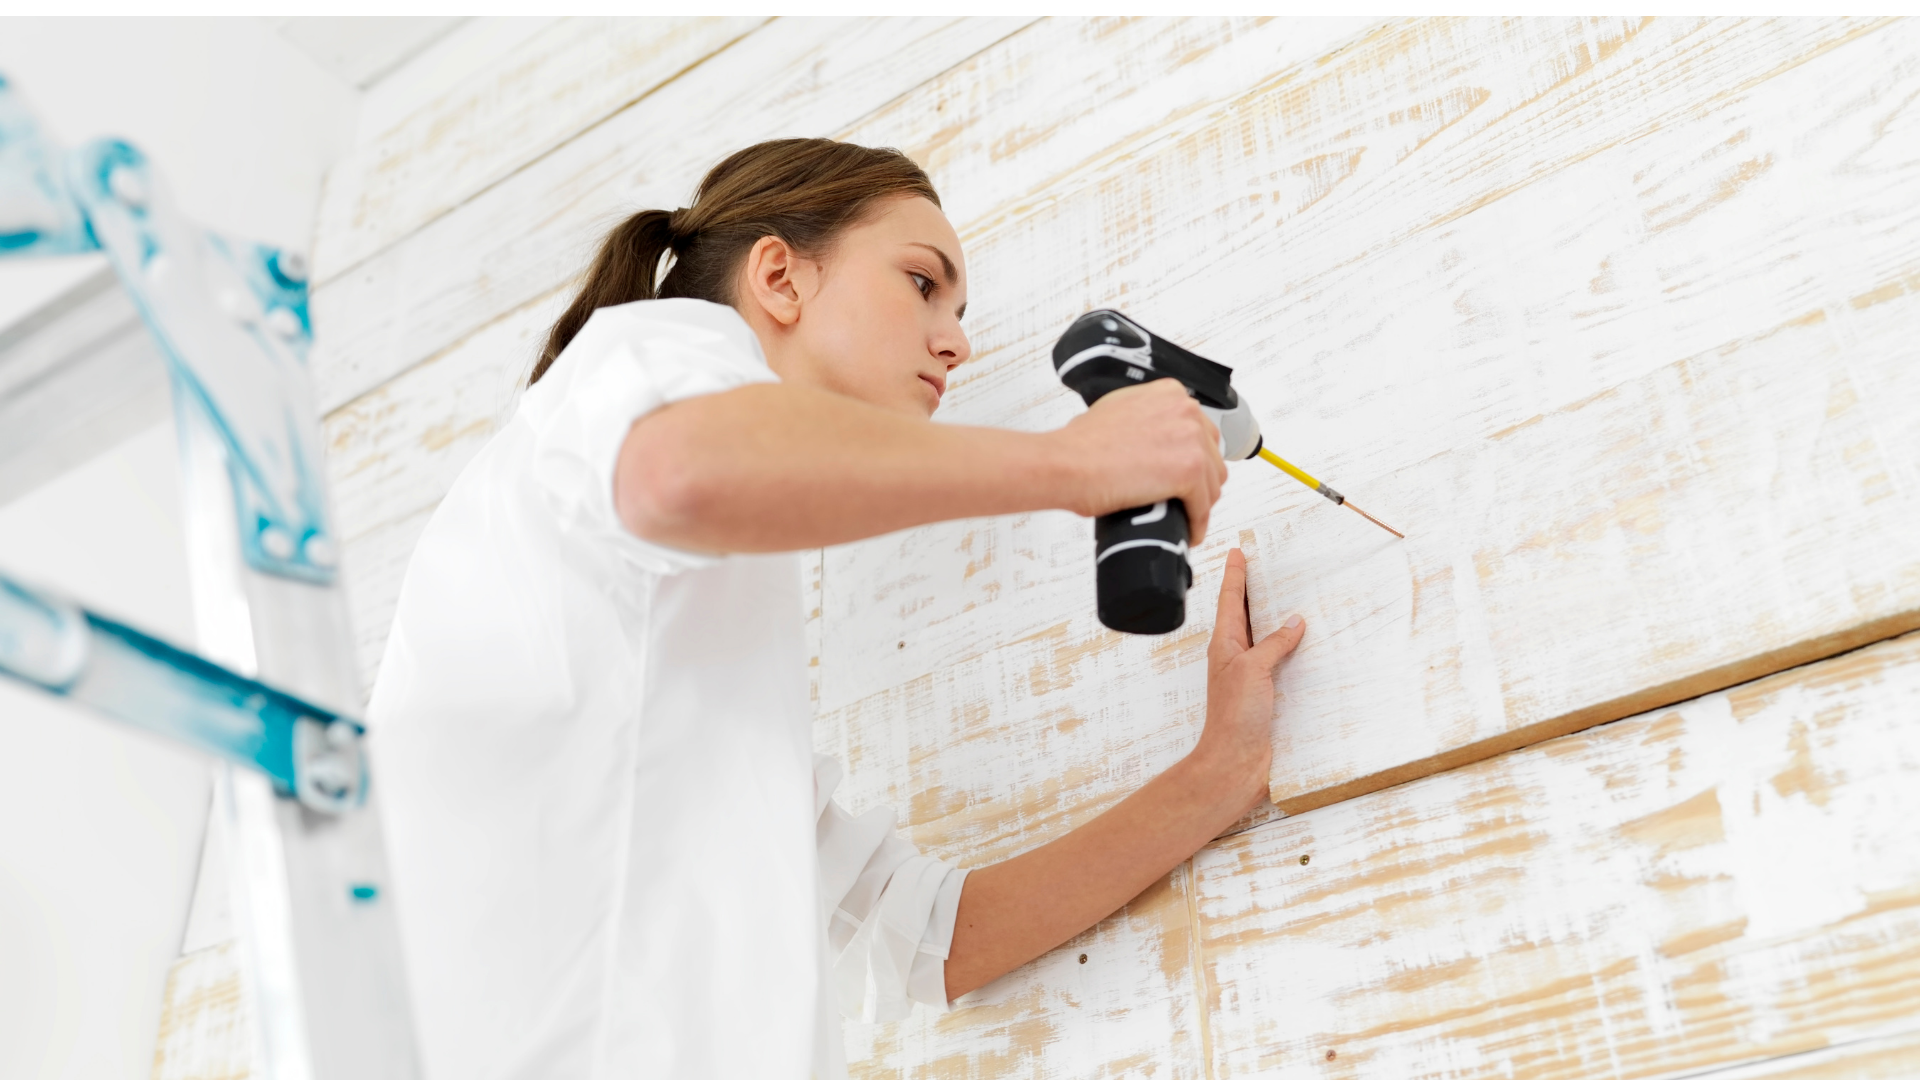 Woman drilling into wall home improvement.